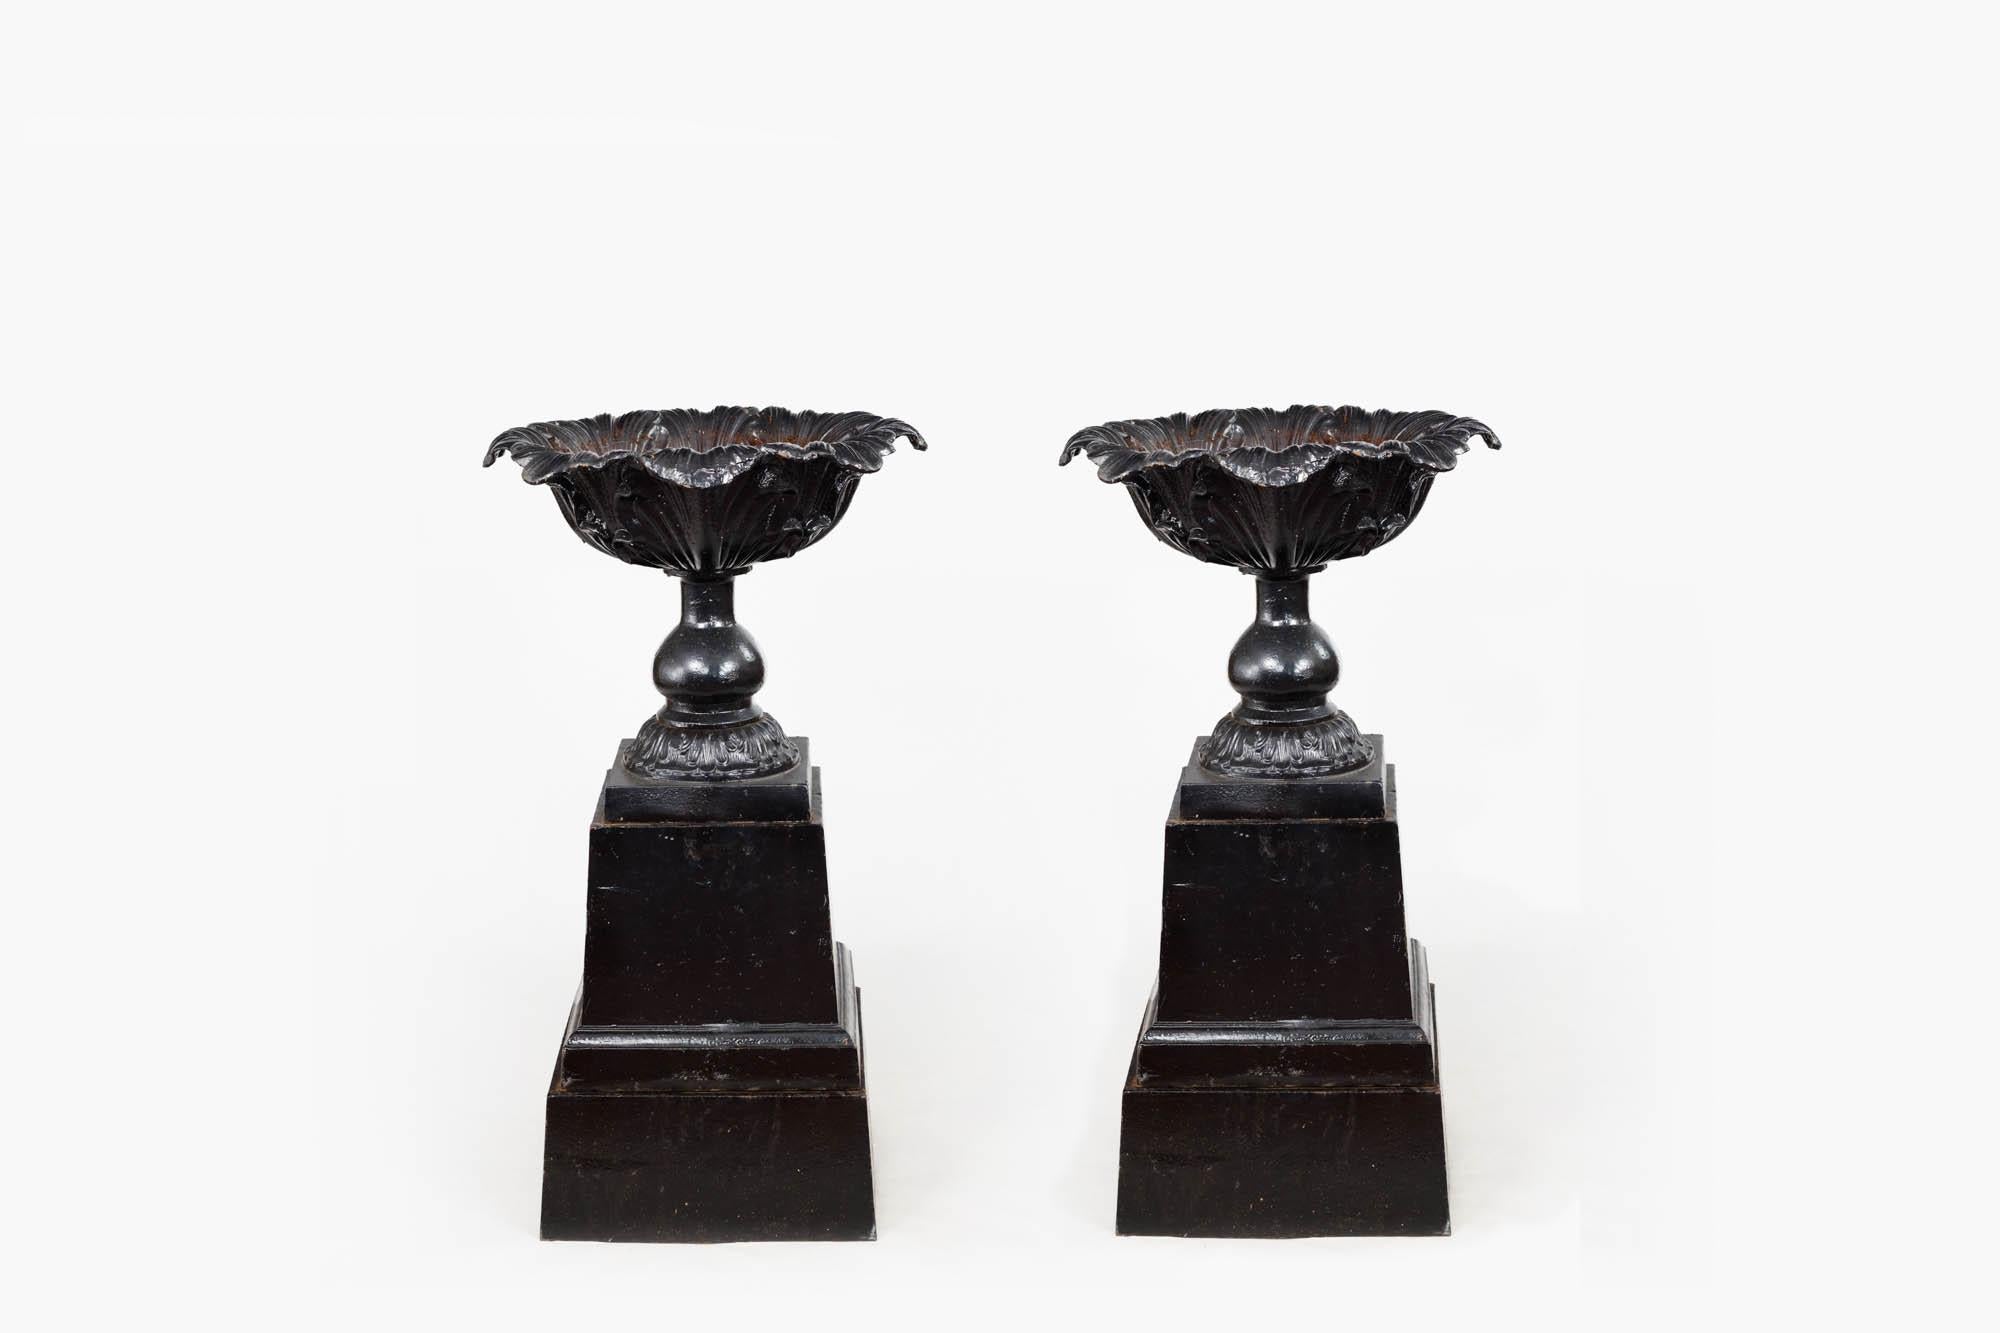 19th century pair of black cast iron urns with baluster pillars and unusual cabbage leaf tops sitting on solid tapering squared bases. The detailed leaf patterns decorating these urns create an organic scalloped naturalistic edge, which contrasts